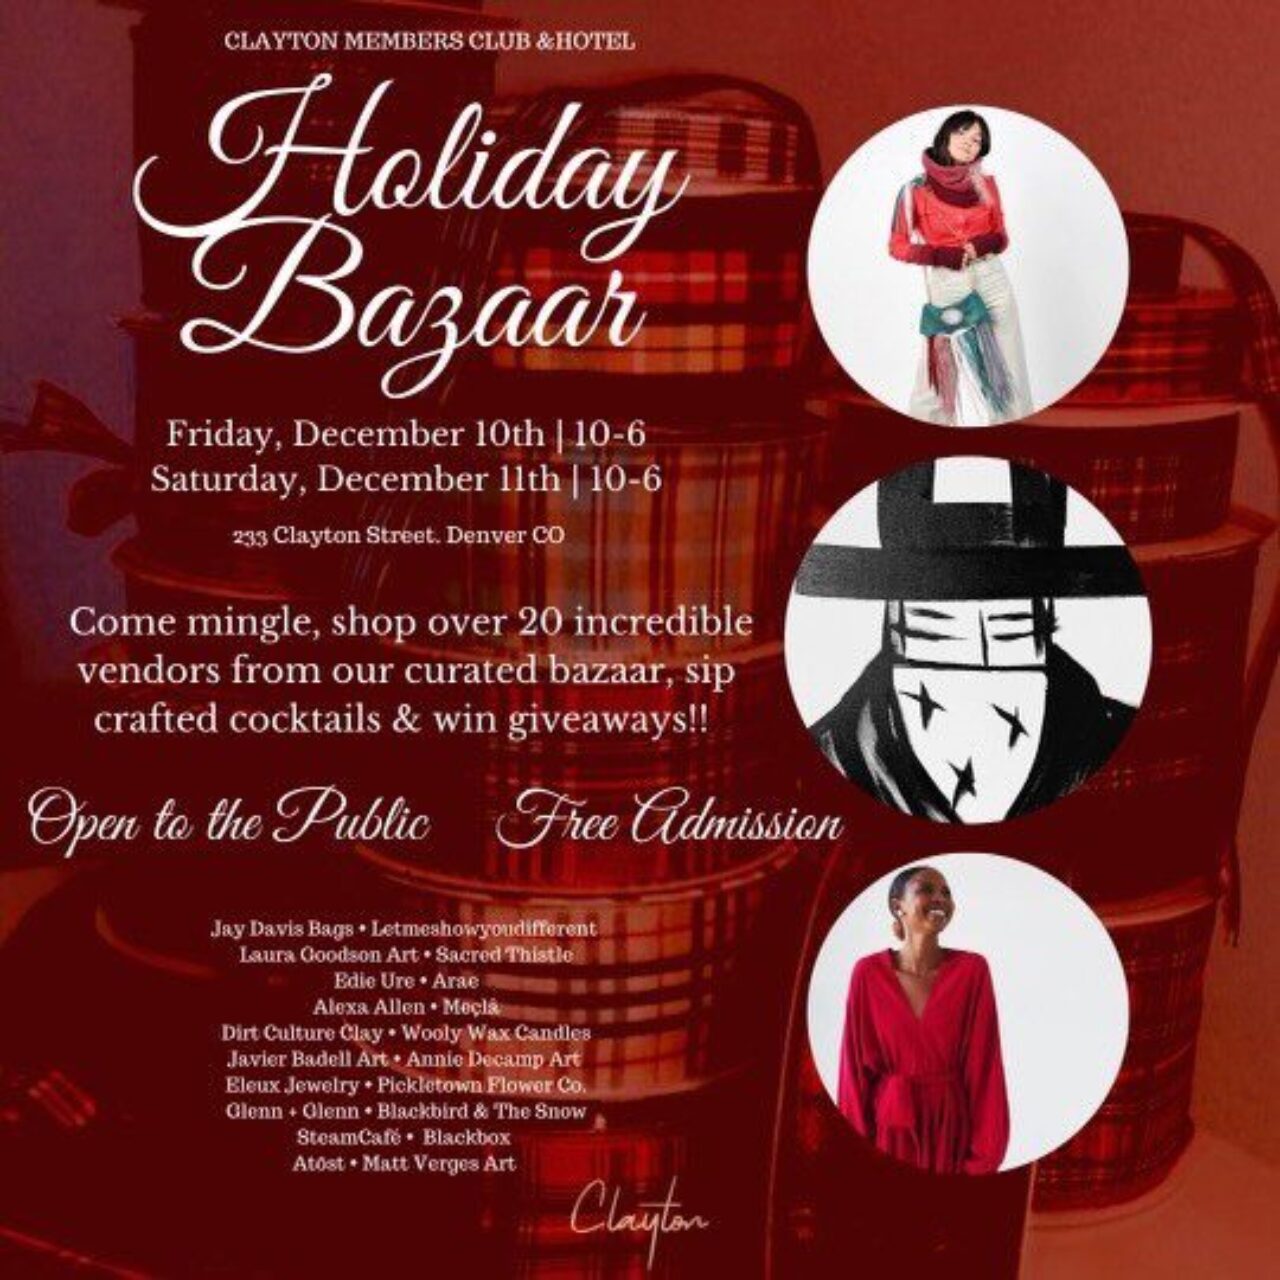 Holiday Bazaar flyer for the Clayton Hotel